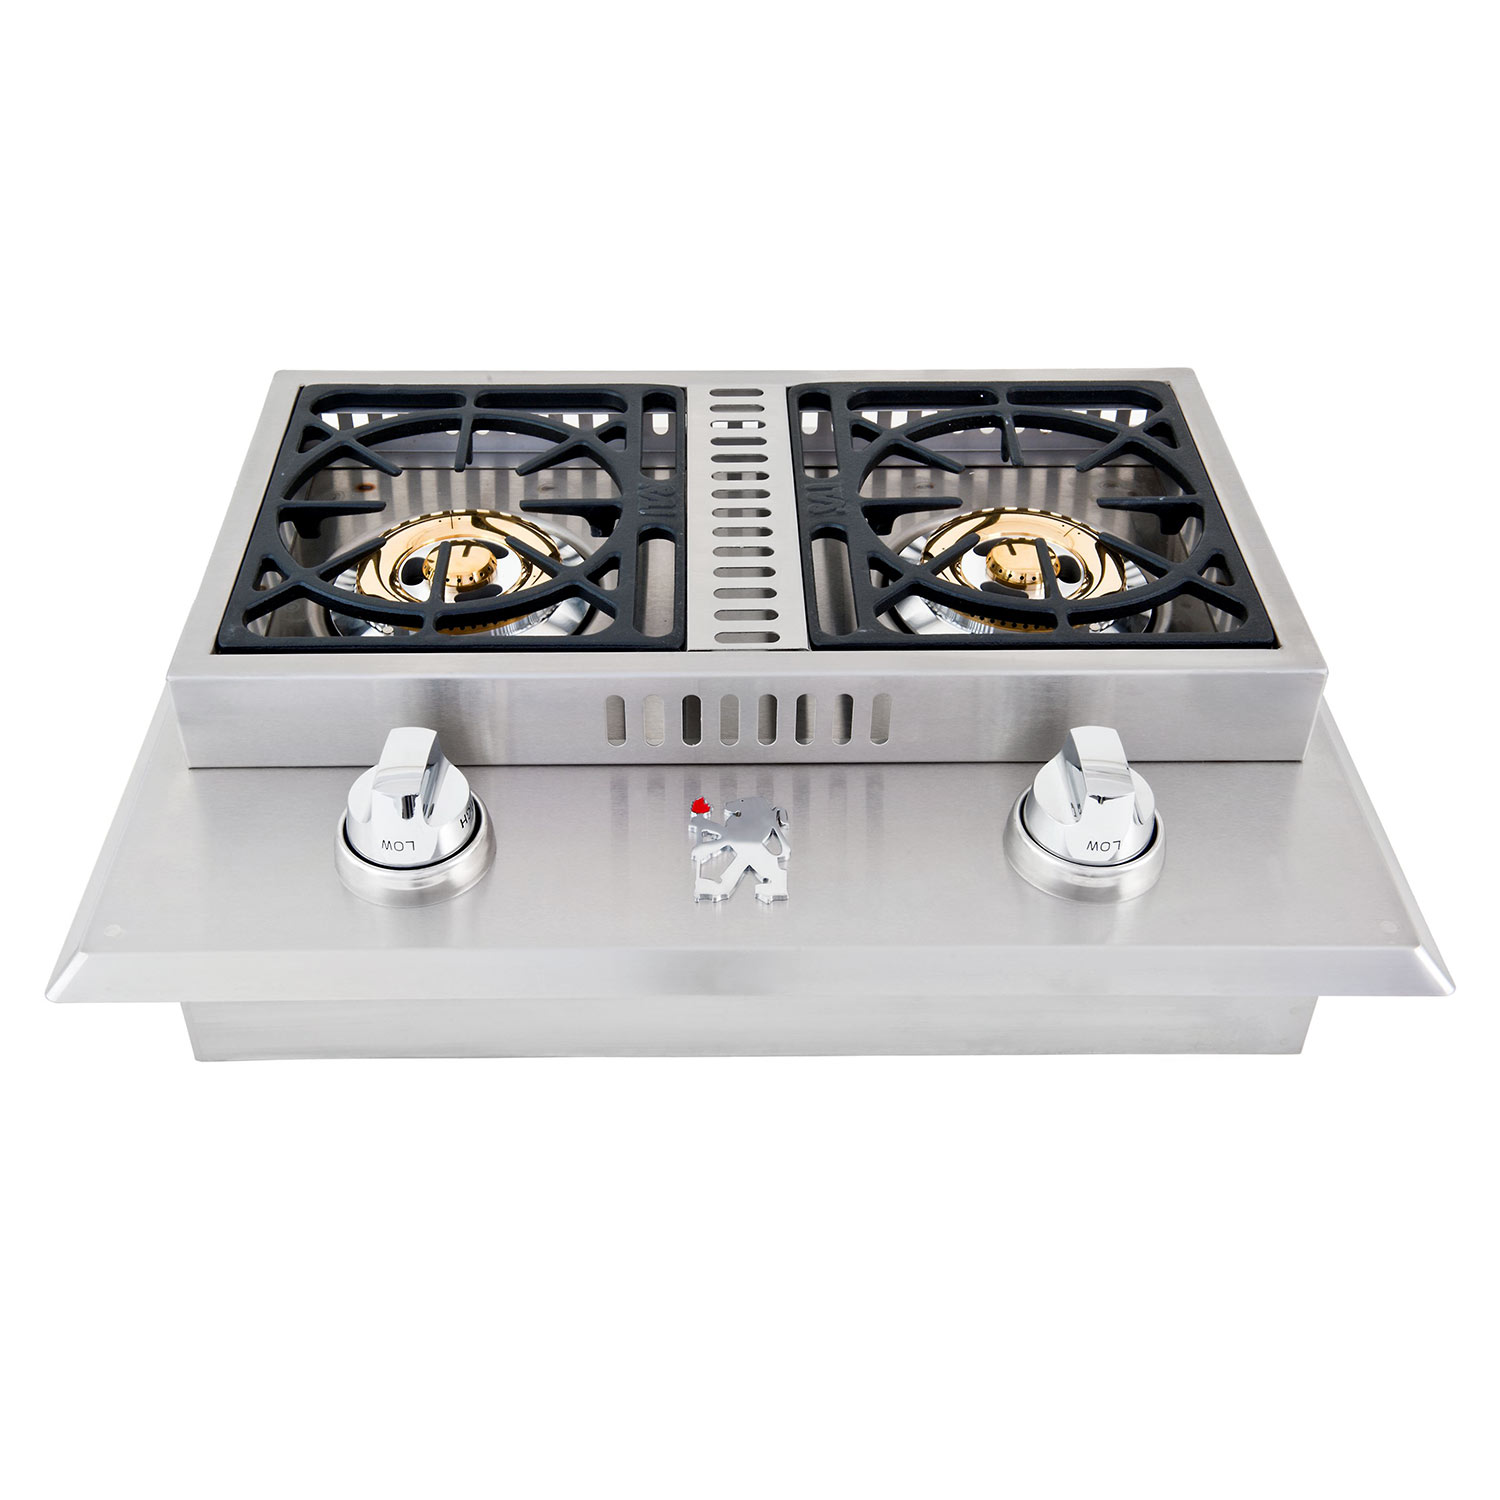 Lion Double Side Burner, 26.75-Inches, Natural Gas - image 1 of 3